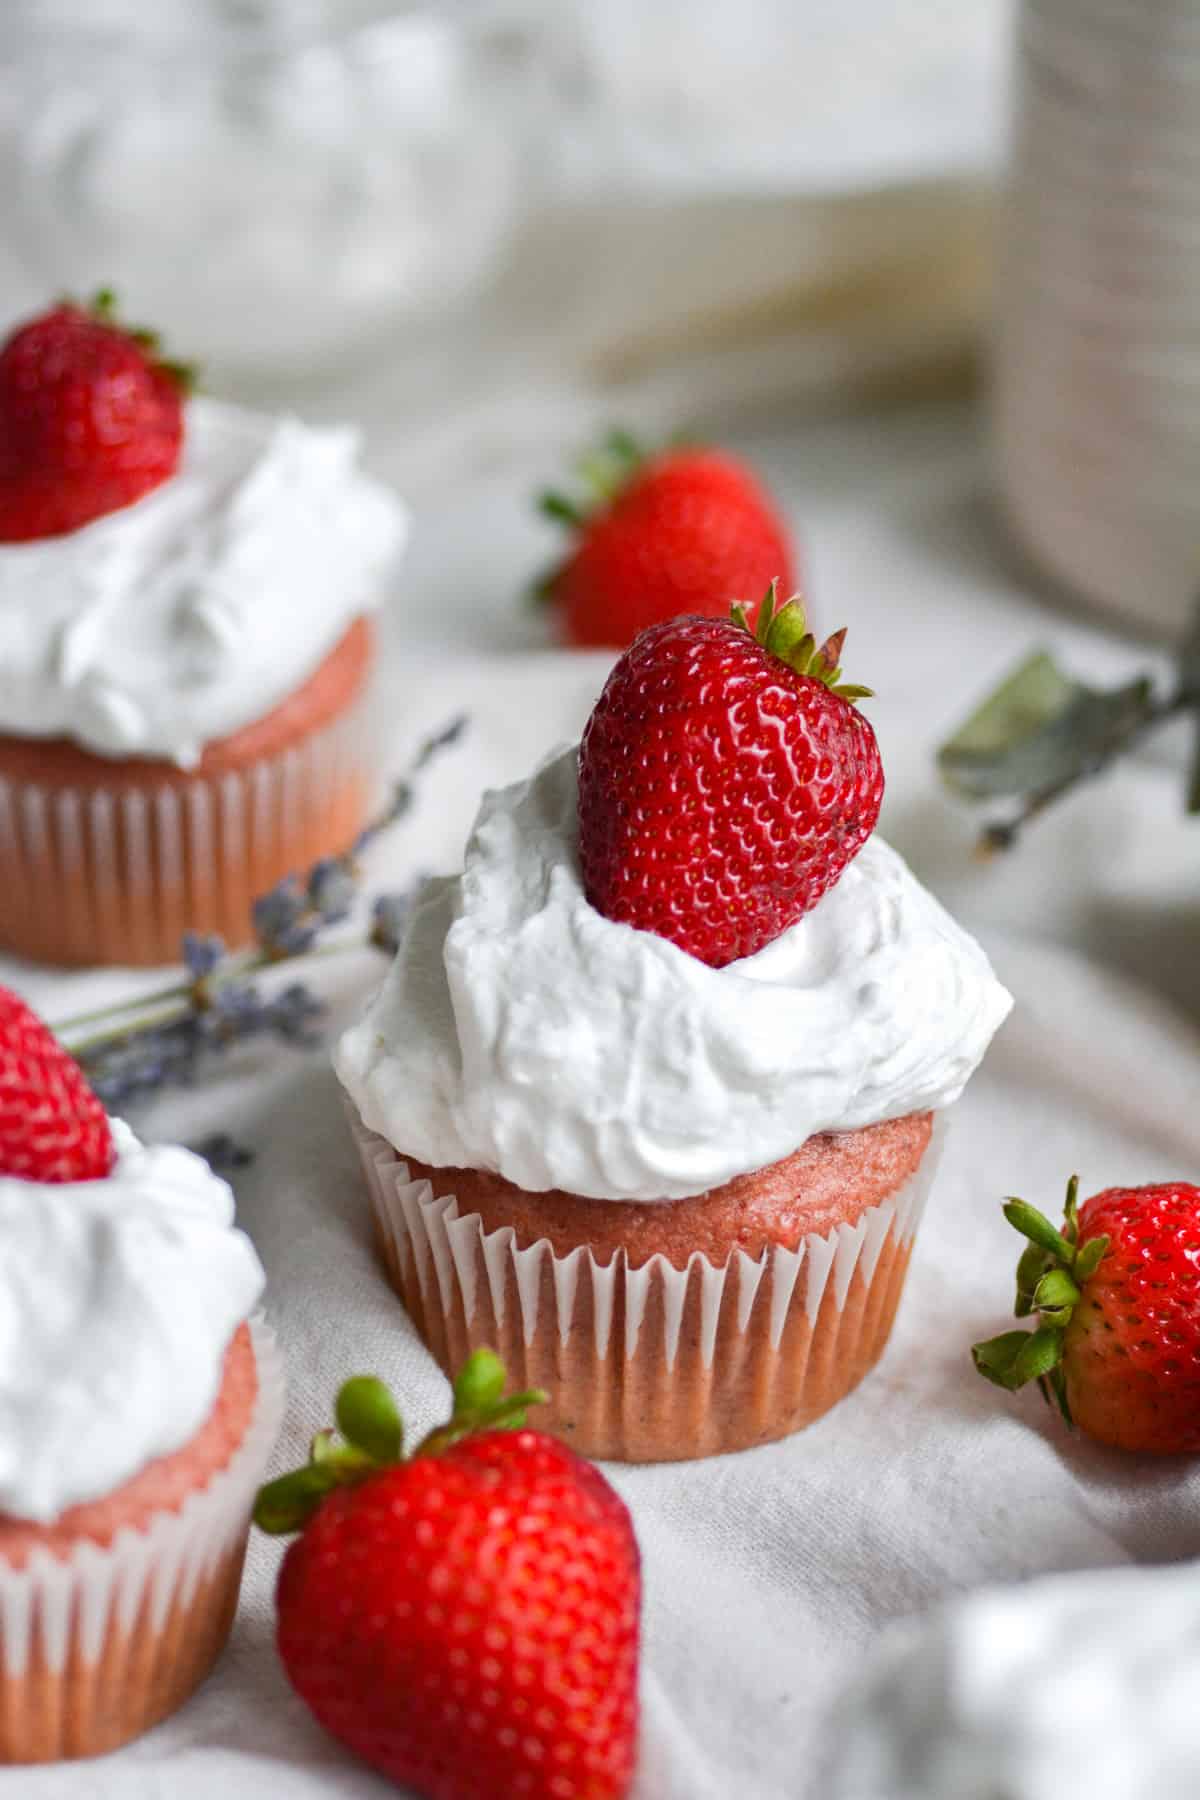 A vegan strawberry cupcake topped with a dollop of whipped cream and a fresh strawberry/